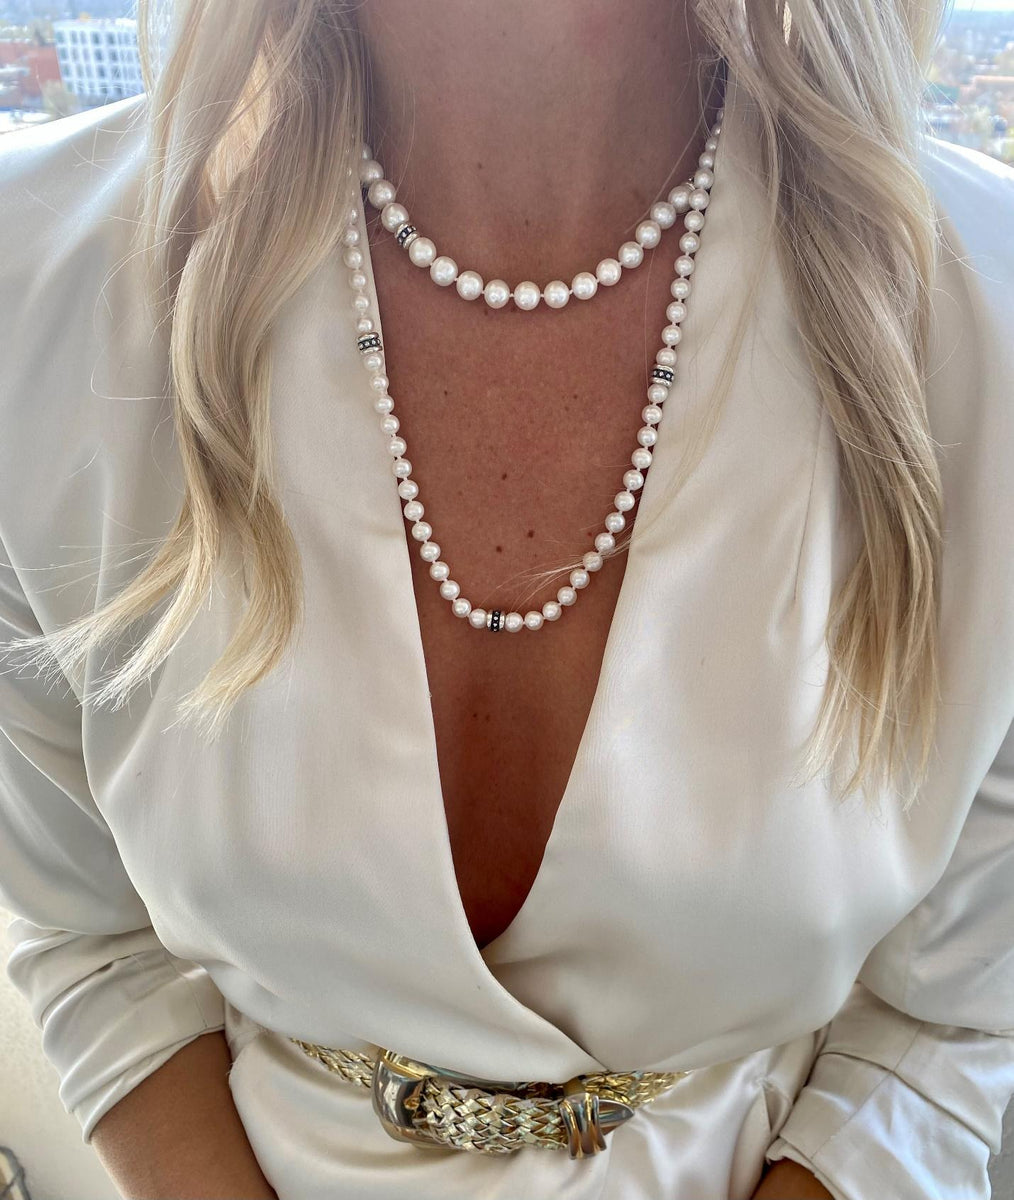 The Spring 2023 Jewelry Trends to Shop, According to an Expert Jeweler